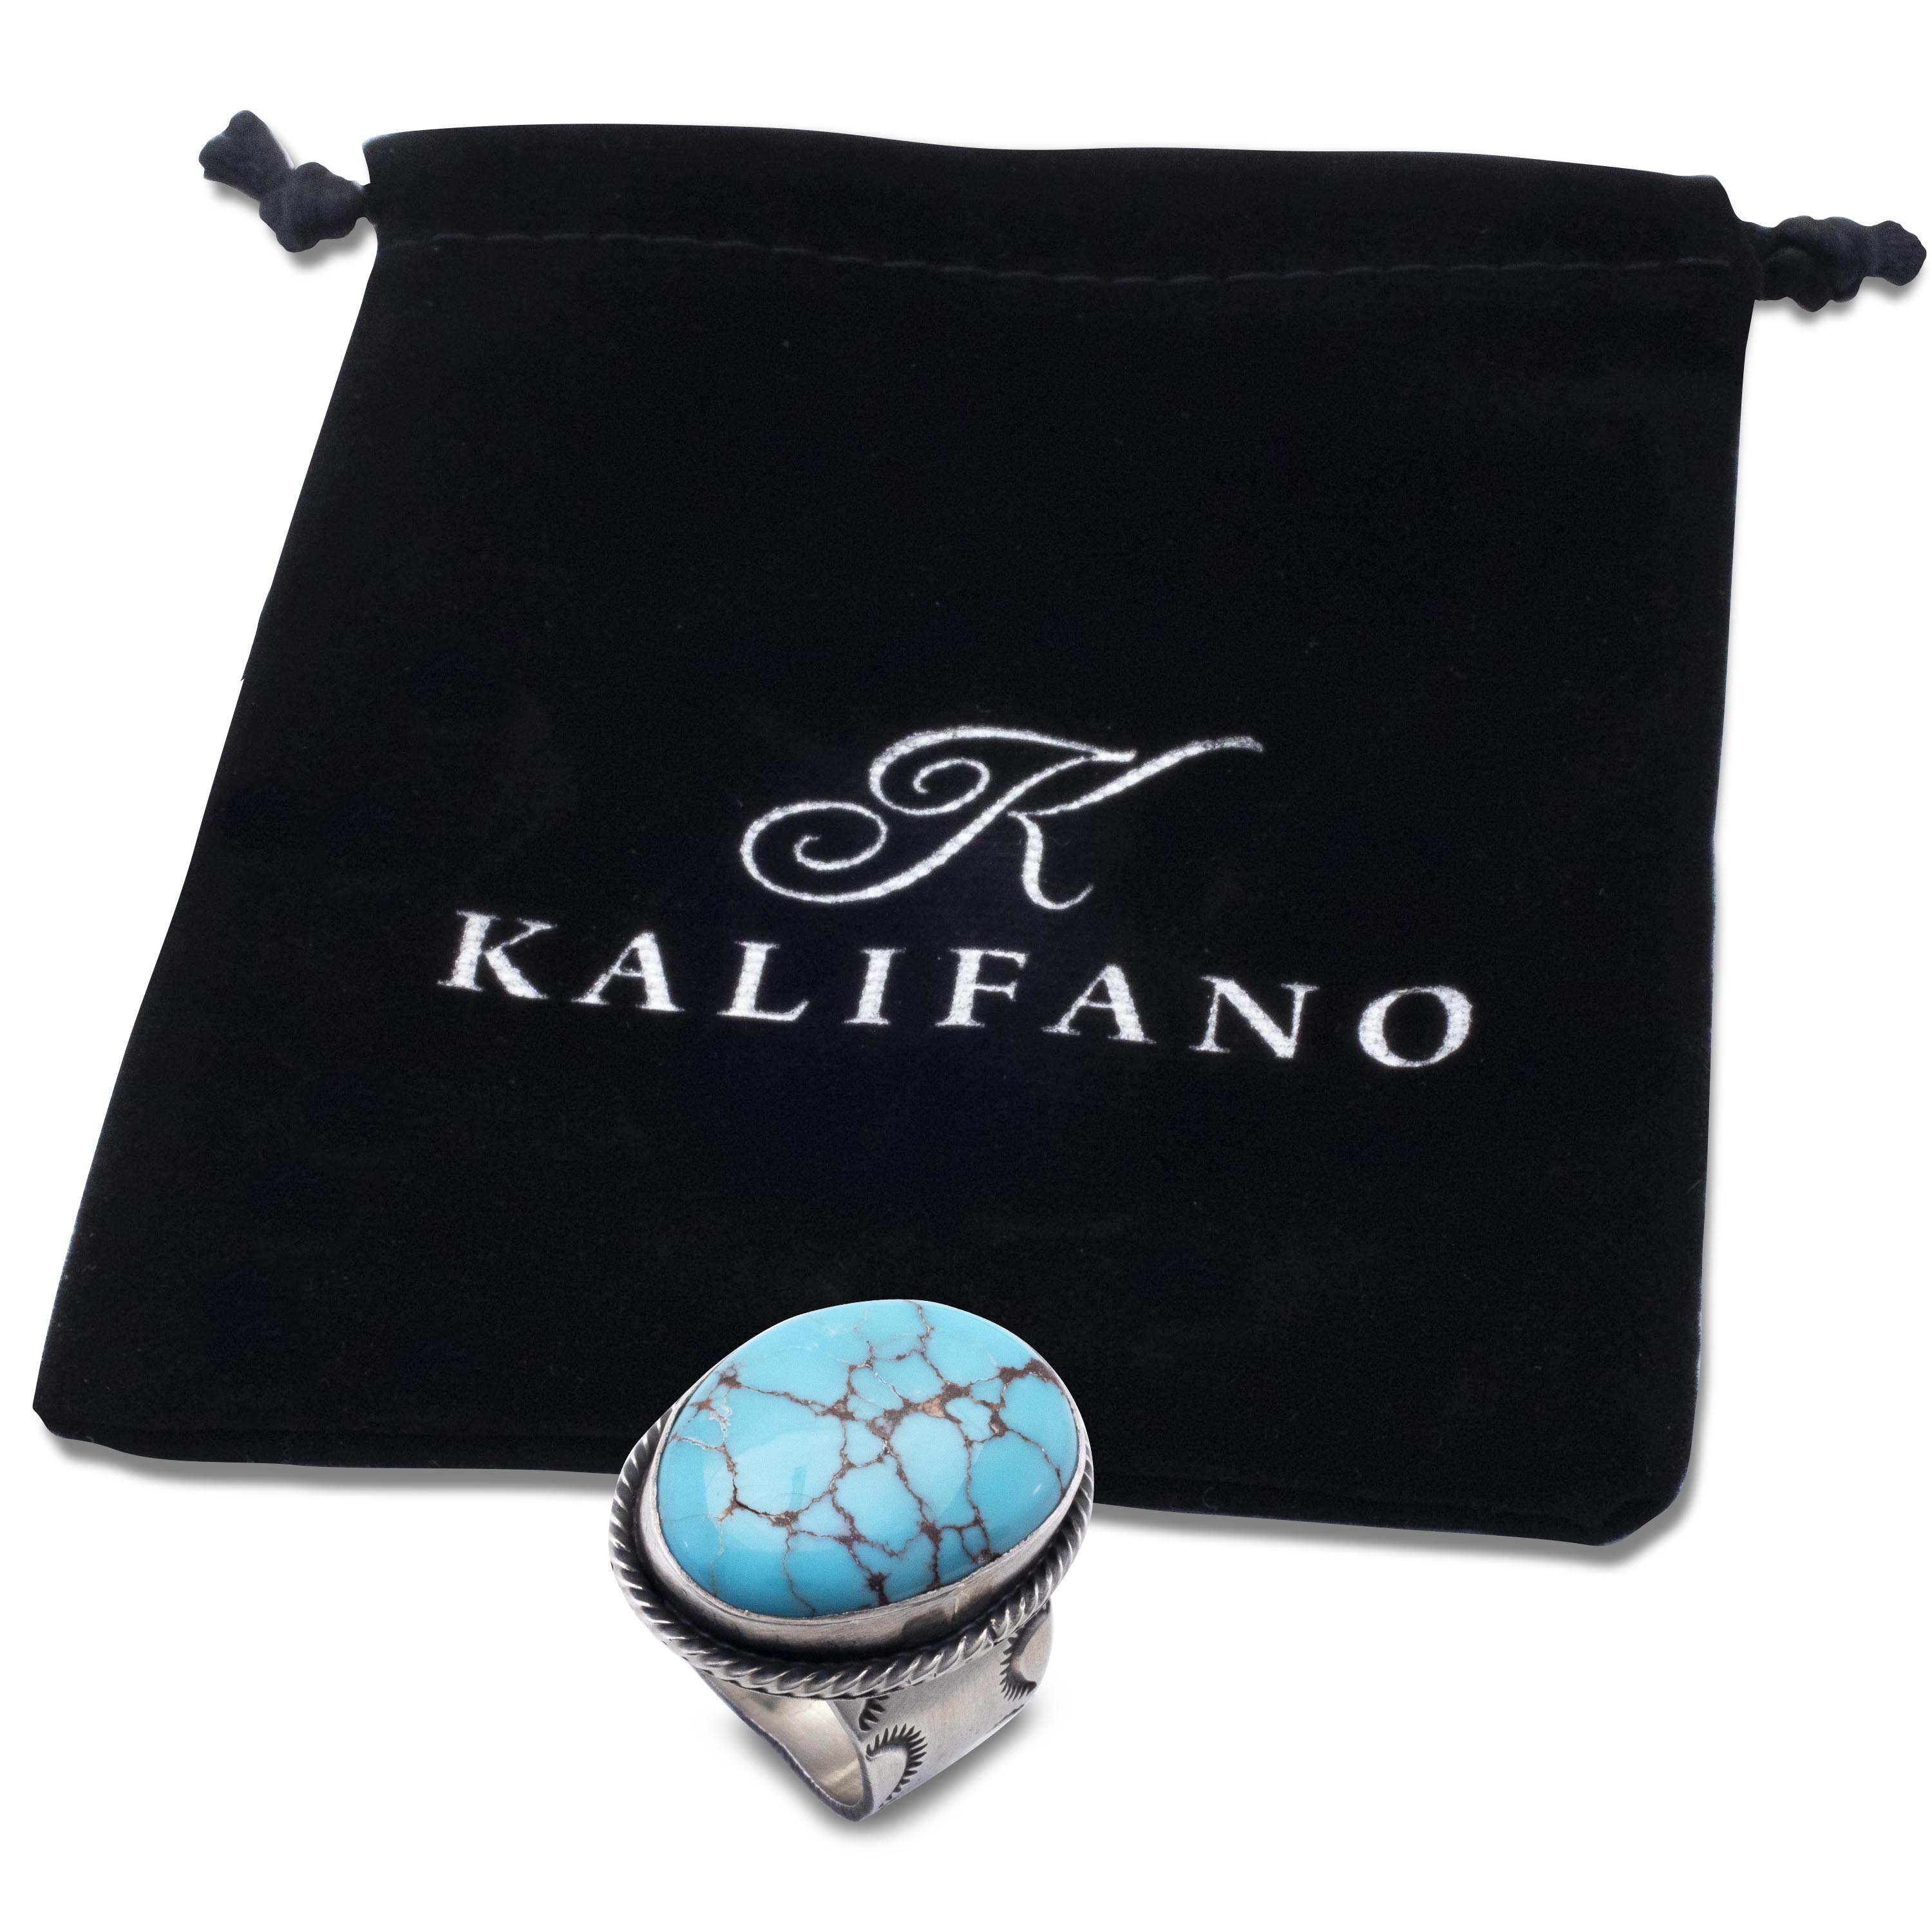 Kalifano Native American Jewelry 8 Prince Turquoise USA Native American Made 925 Sterling Silver Ring NAR1200.048.9